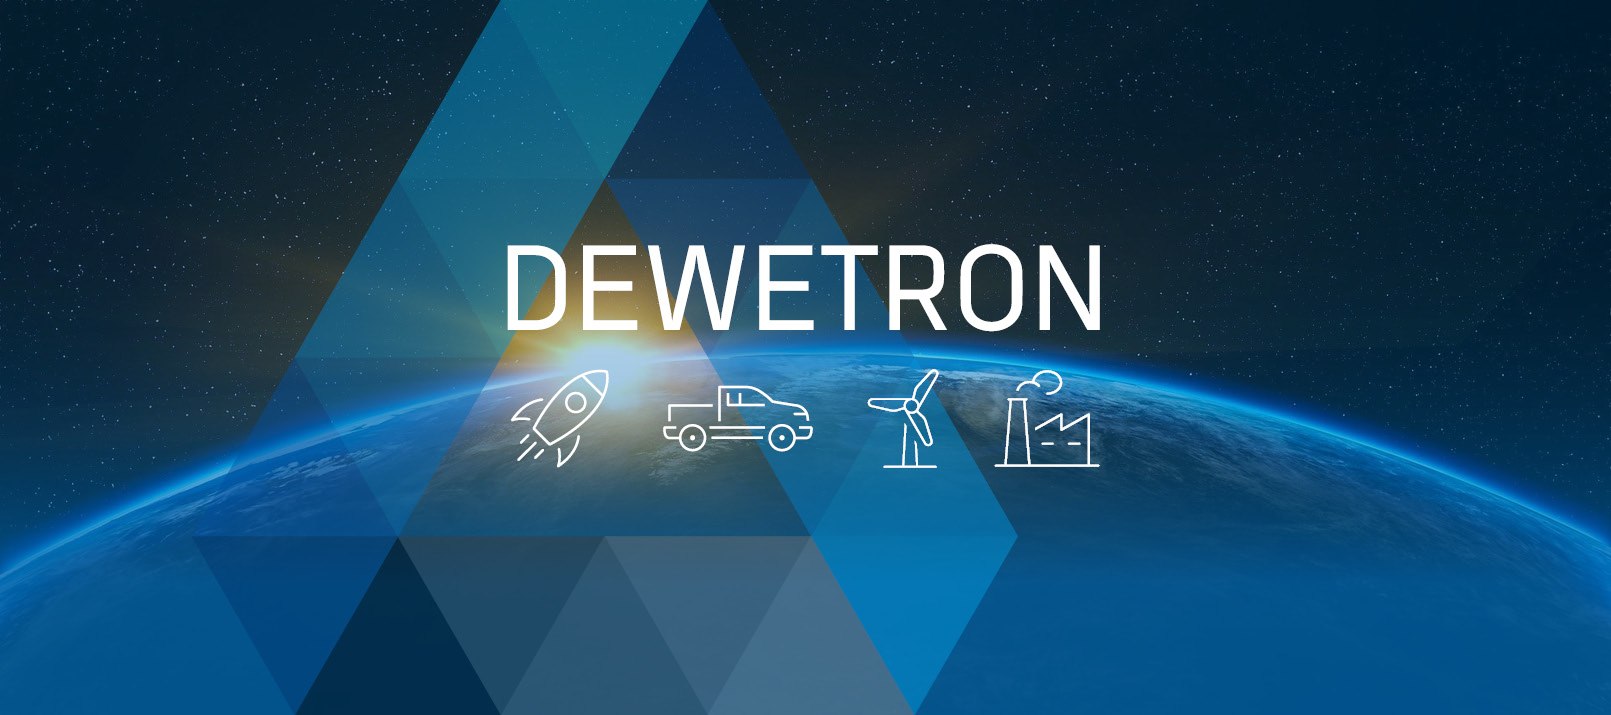 DEWETRON Application Examples - The World of DEWETRON